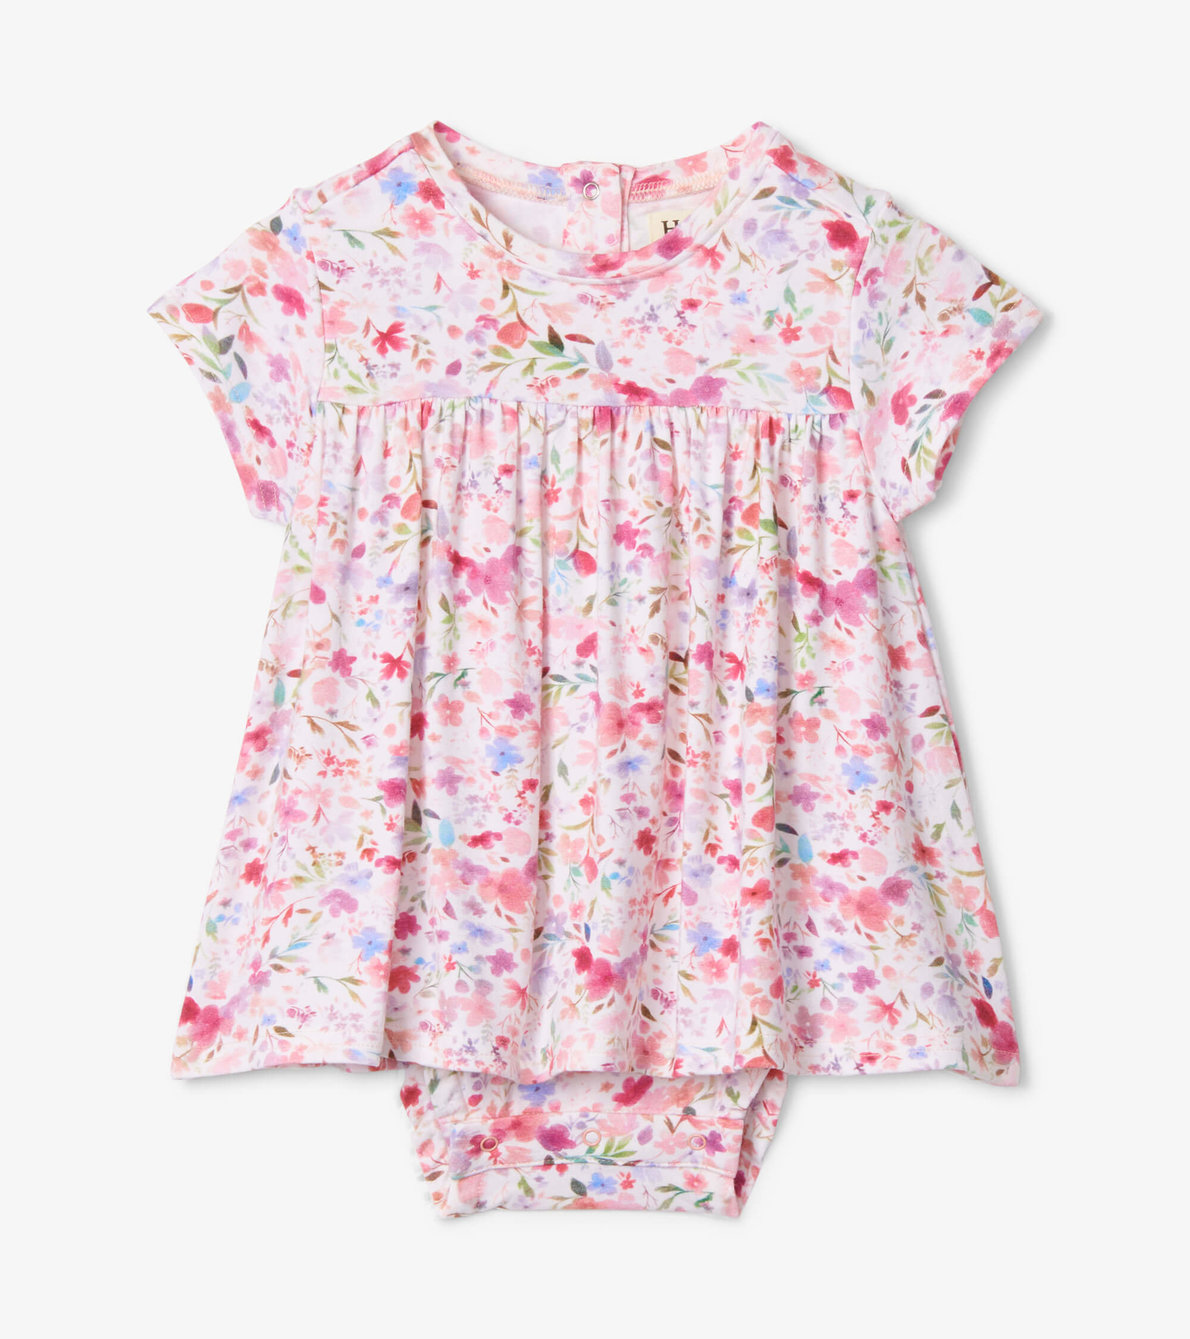 View larger image of Watercolour Flowers Baby One Piece Dress